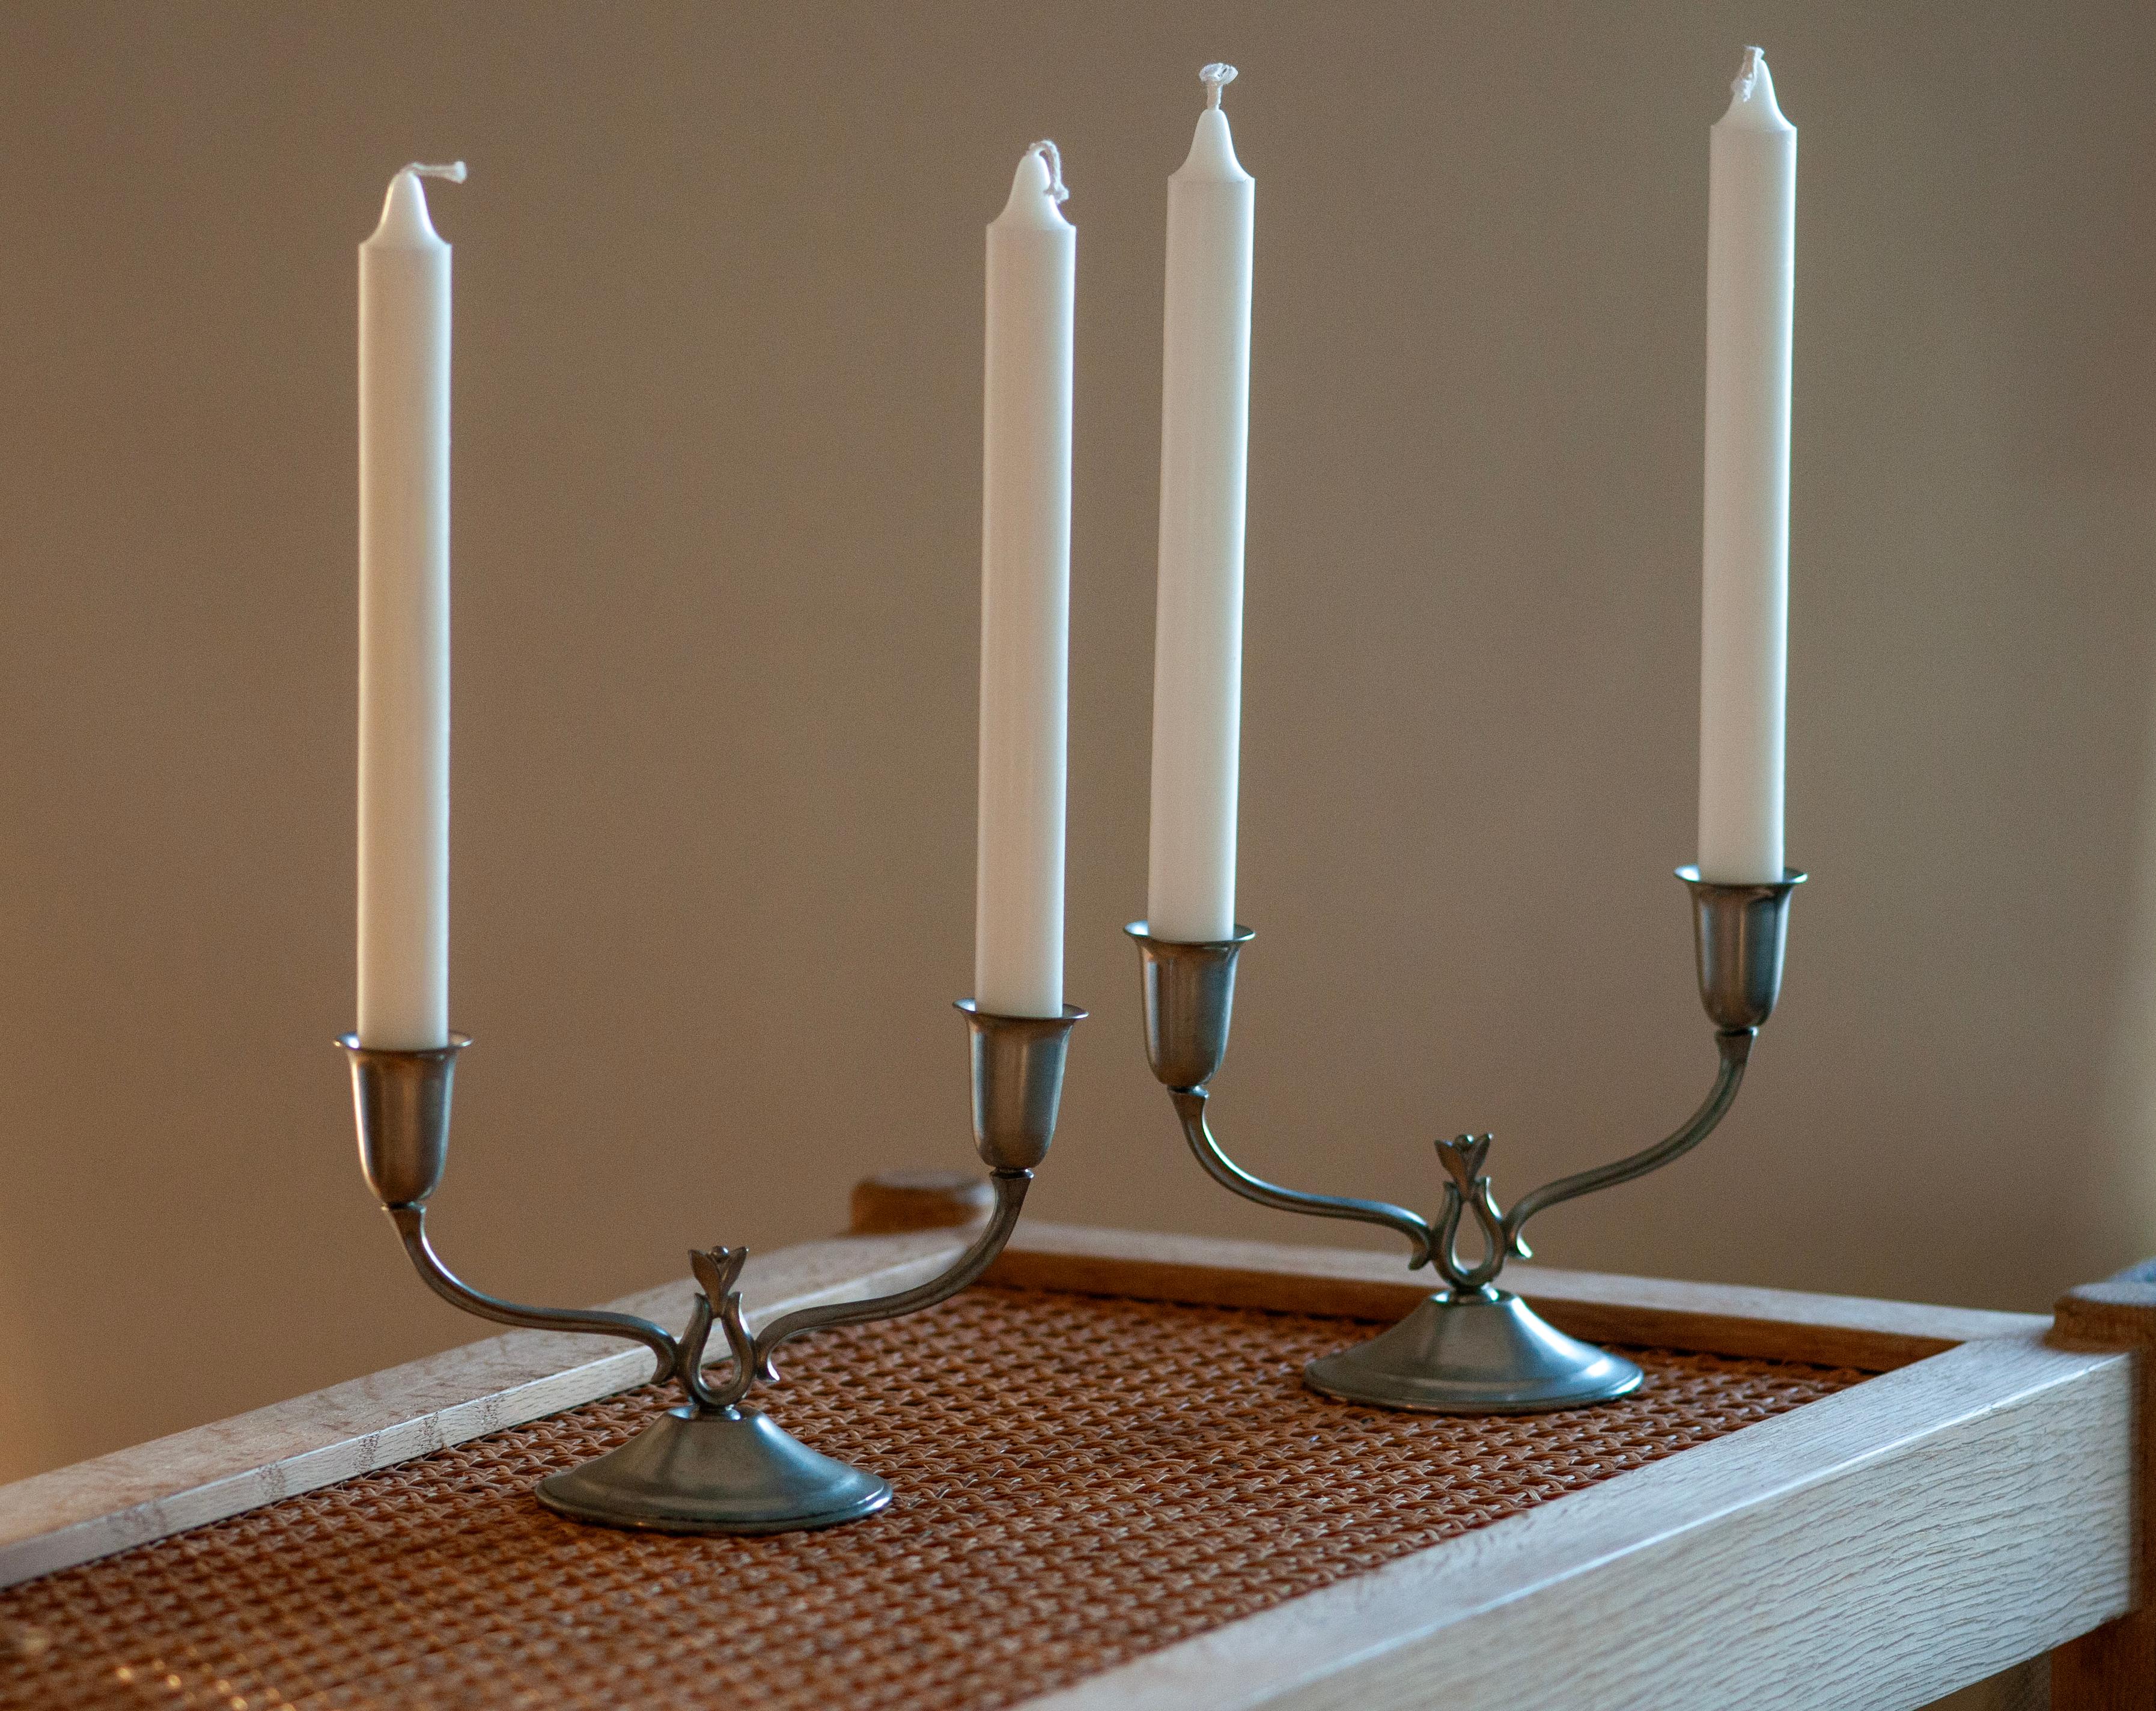 Svenskt Tenn Candleholders: A Timeless Testament to Swedish Design Heritage Since 1937.

Founded by Estrid Ericson in 1924, Svenskt Tenn's rich history intertwines with the visionary Austrian architect Josef Frank, forming a design legacy that